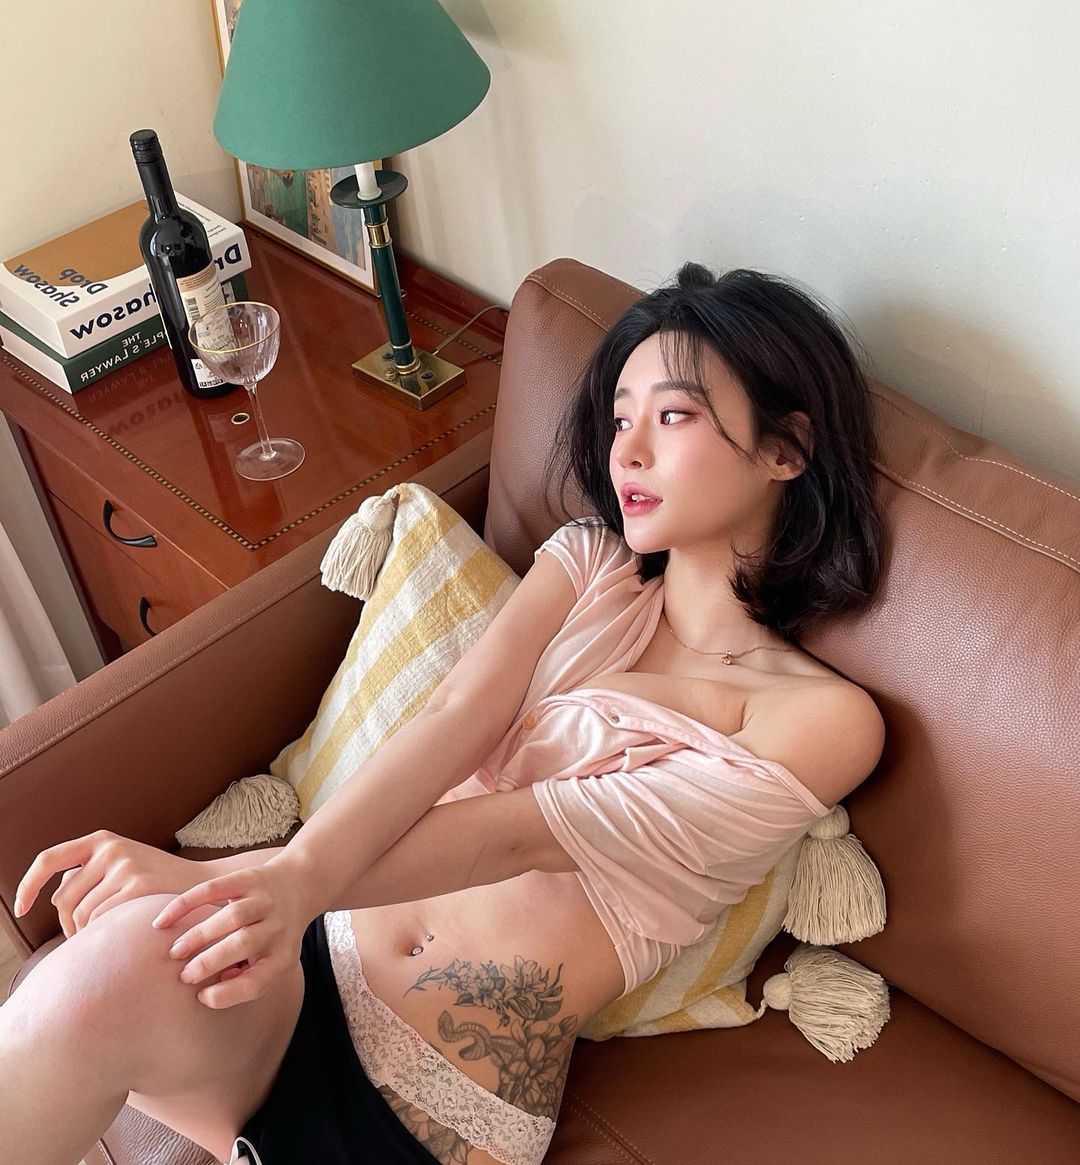 Rahee, the influencer who acts sexy on YouTube